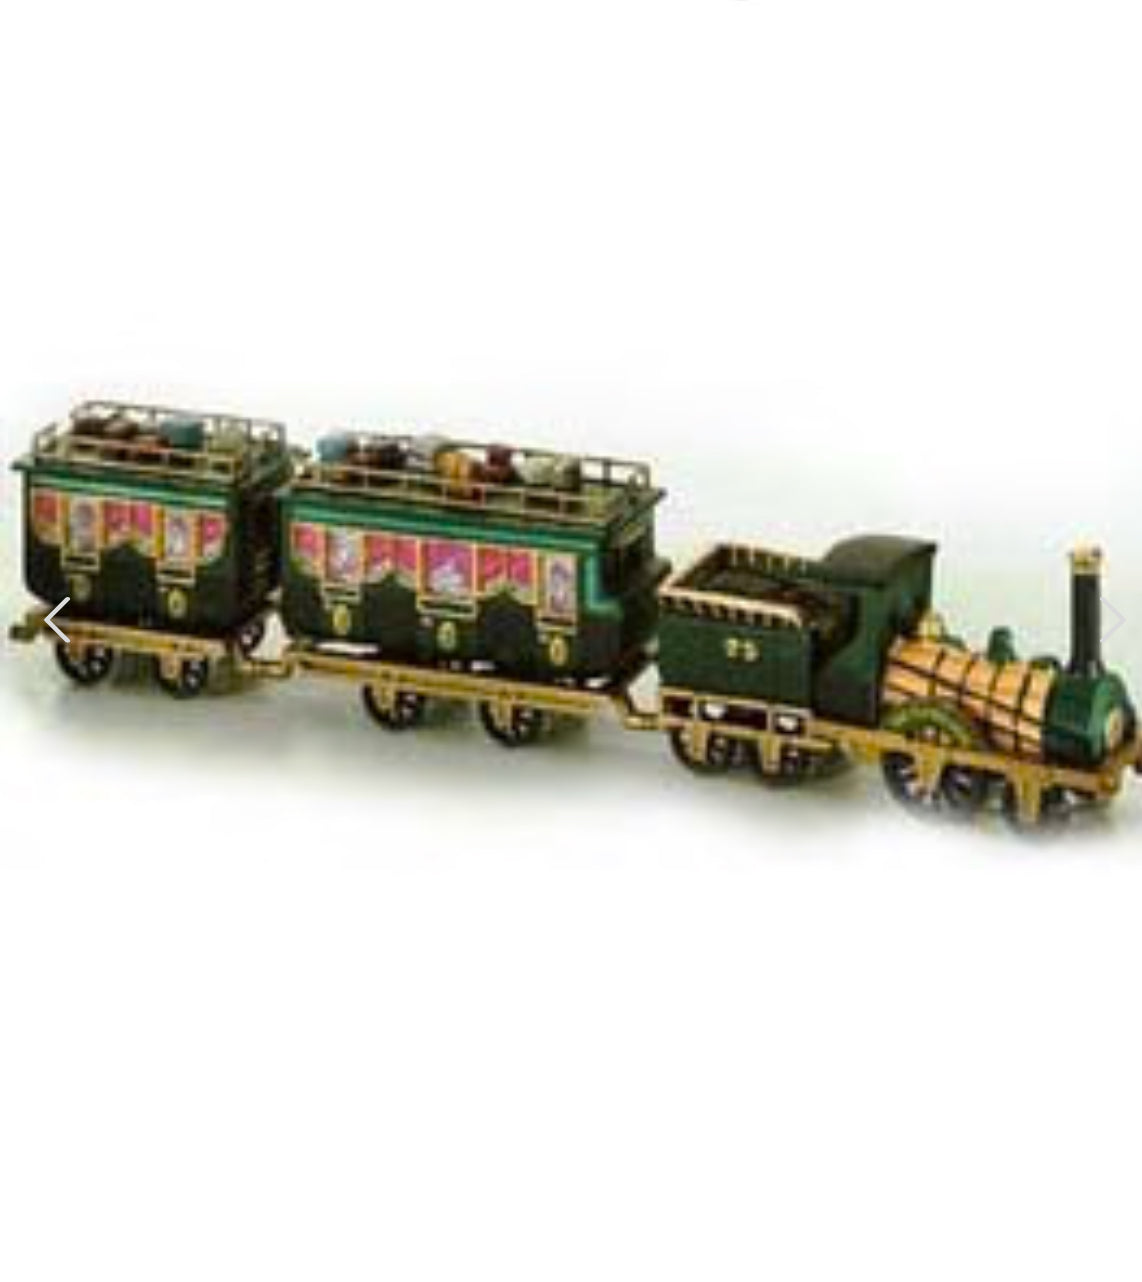 Department 56 - Heritage Village - The Flying Scot Train